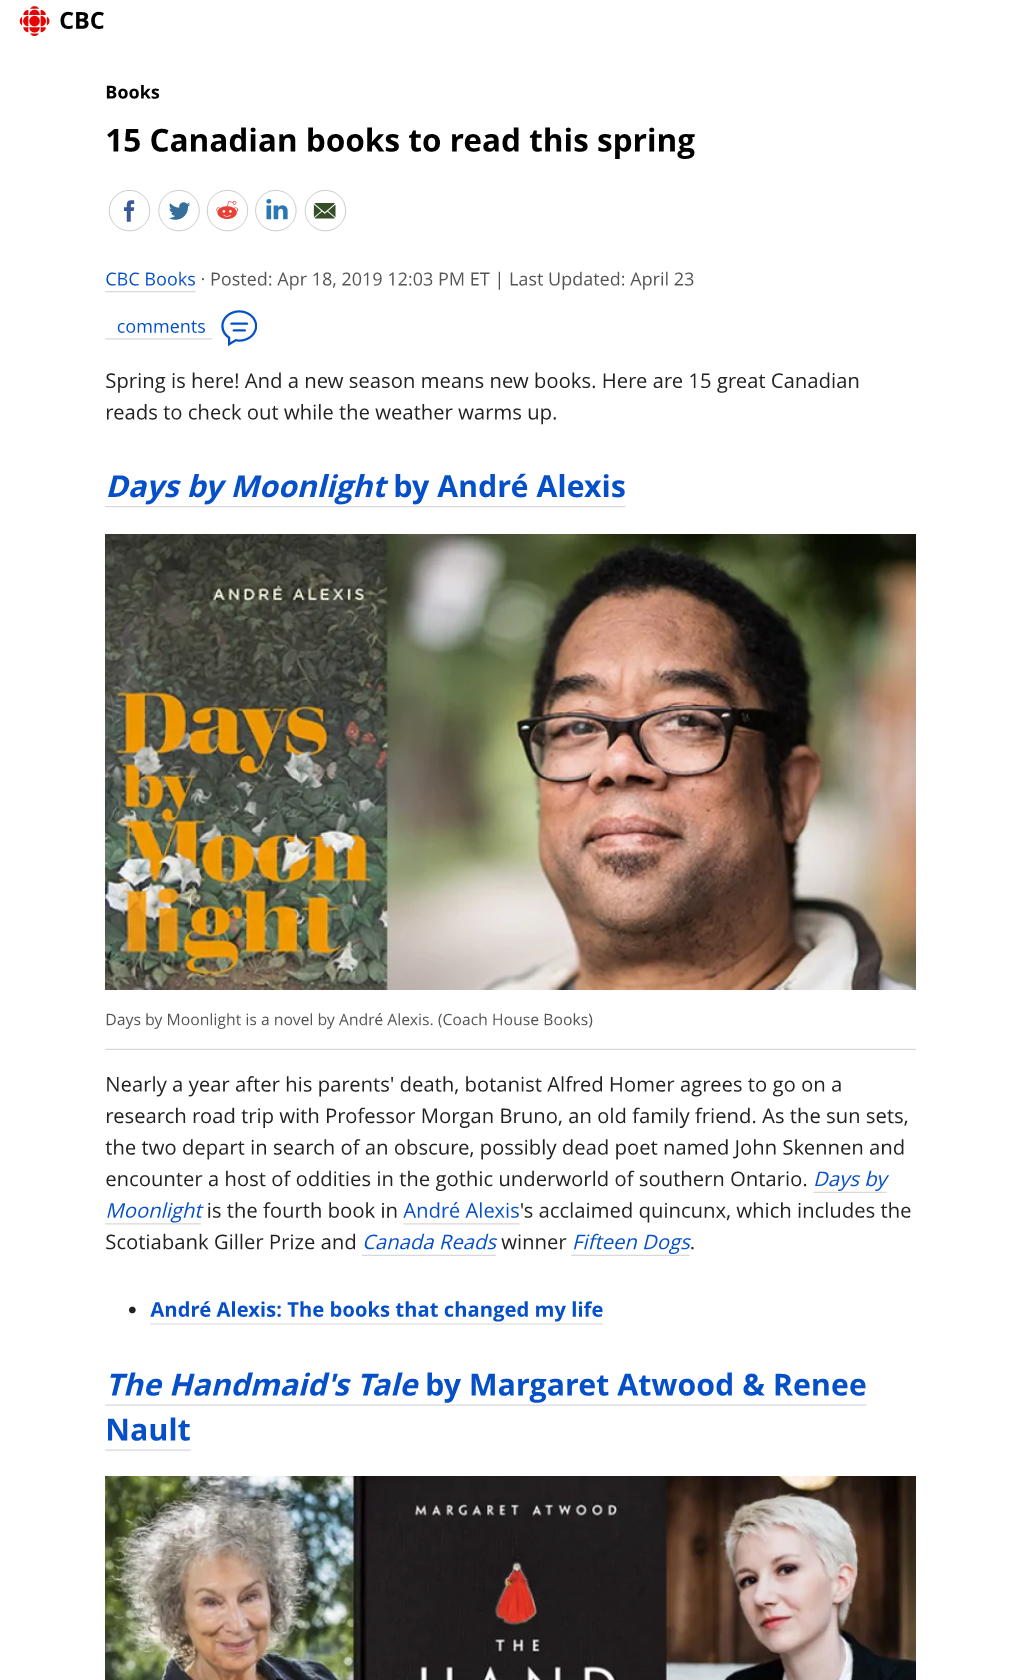 15 Canadian Books to Read This Spring Days by Moonlight by André Alexis